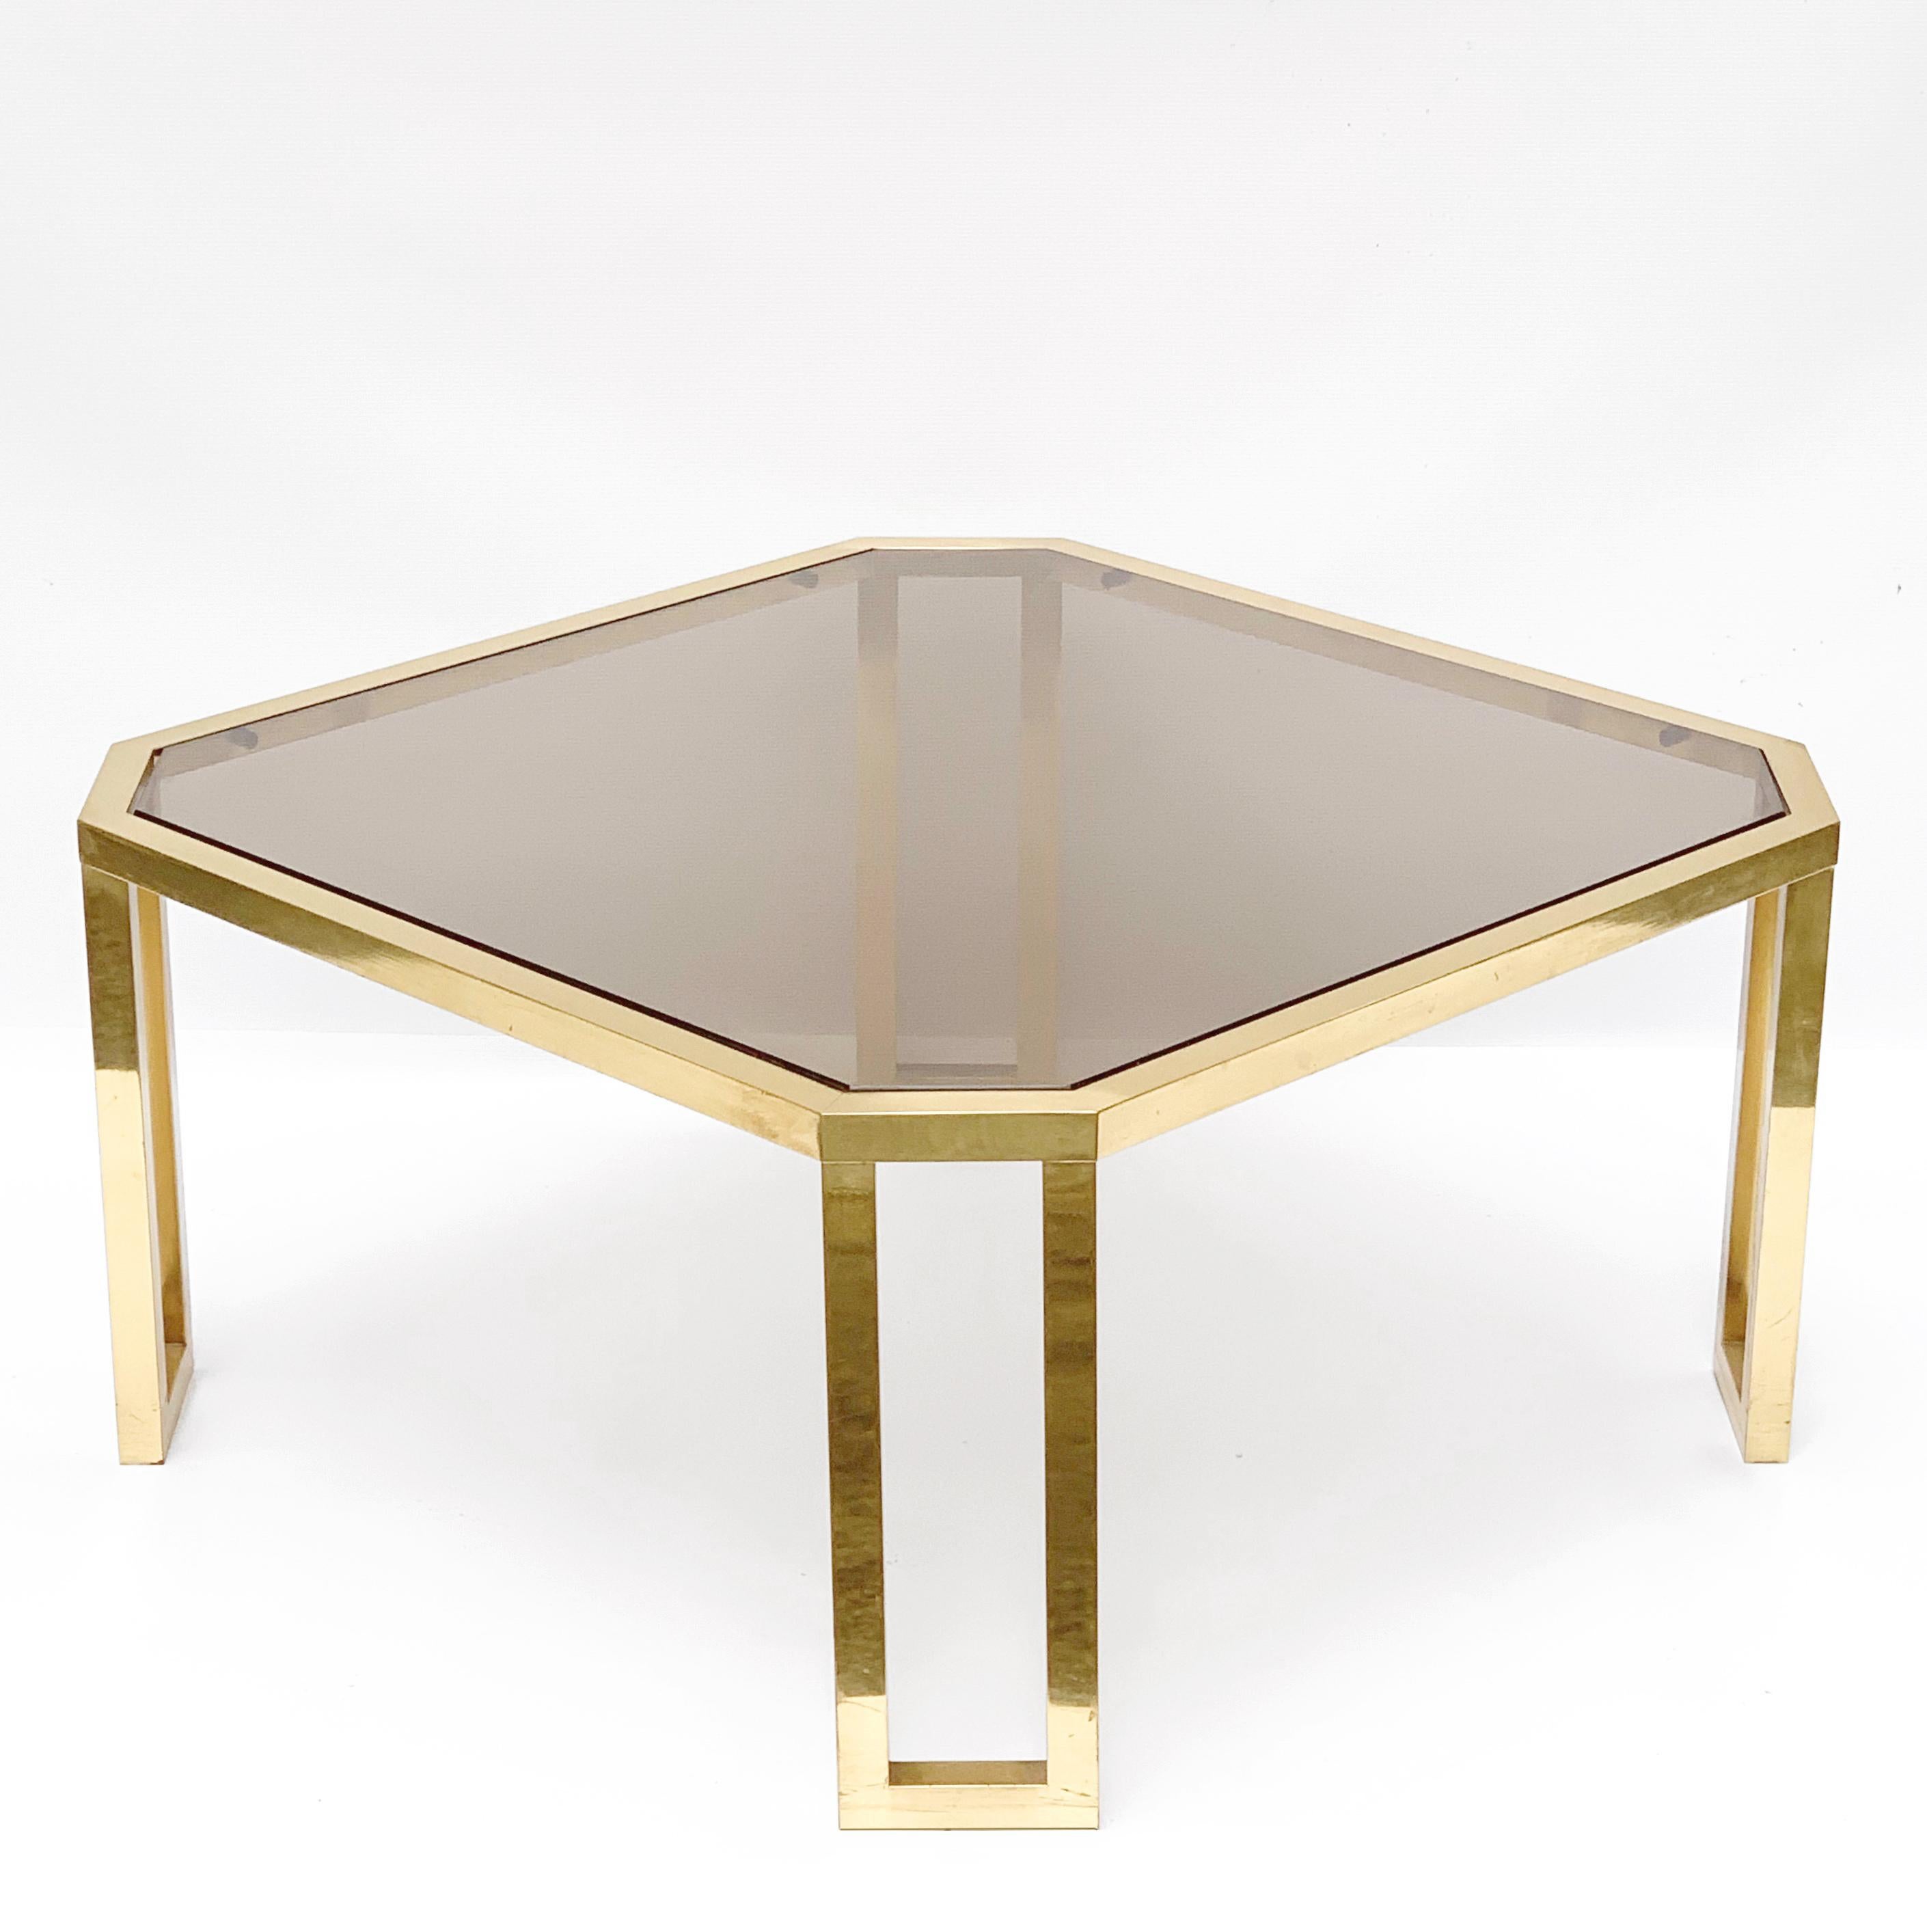 Maison Jansen Octagonal Tables in Brass and Glass, France, 1970s Coffee Tables For Sale 6